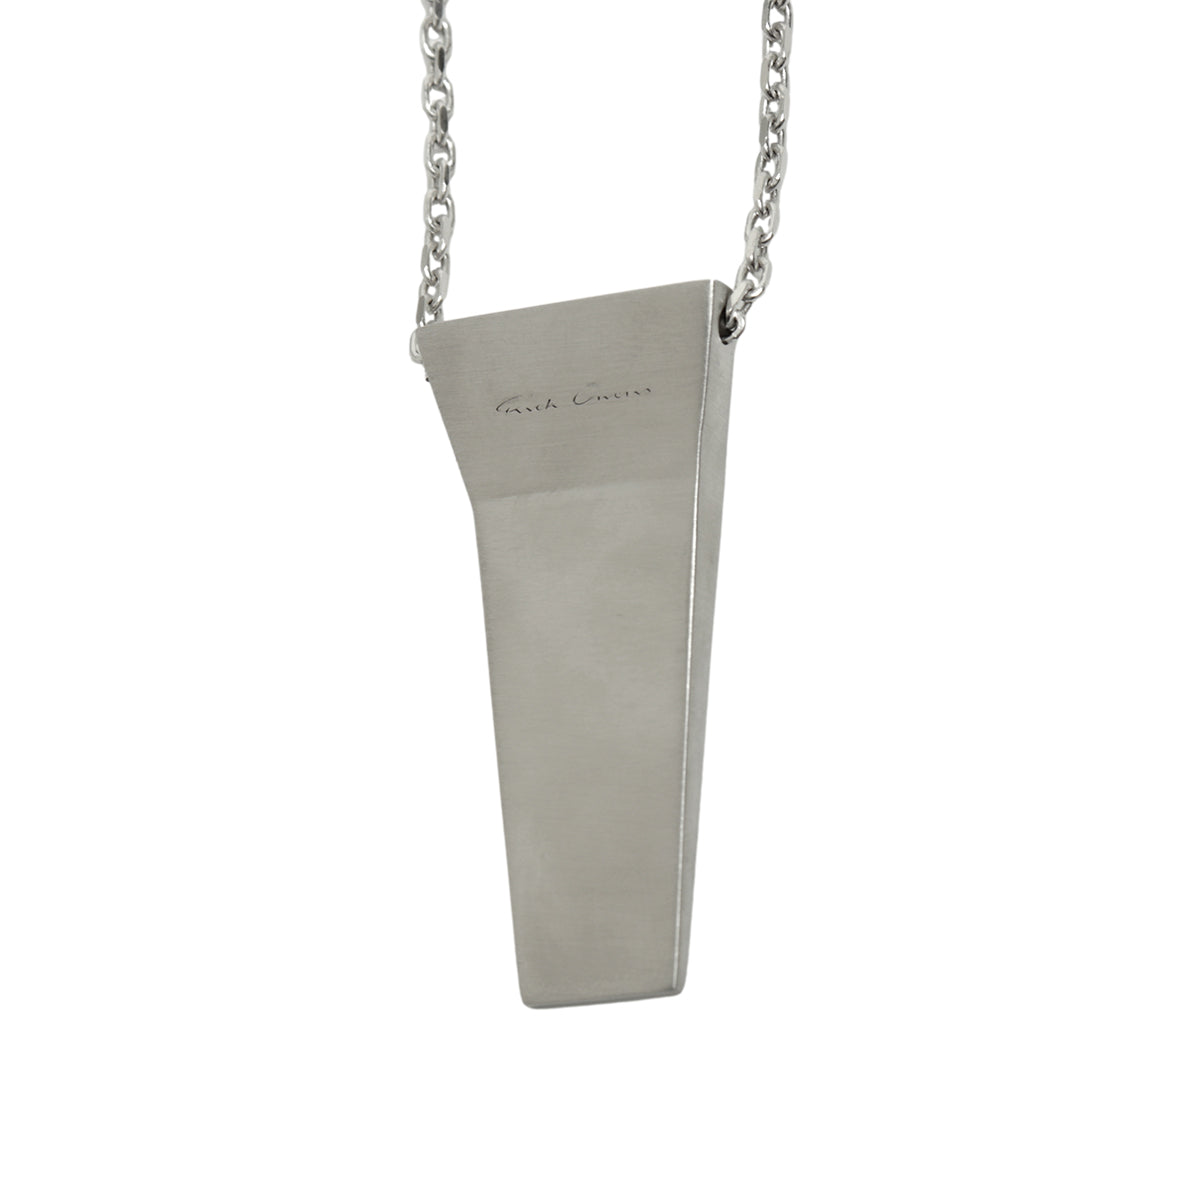 RICK OWENS (リック・オウエンス) - TRUNK CHARM NECKLACE ネックレス ...